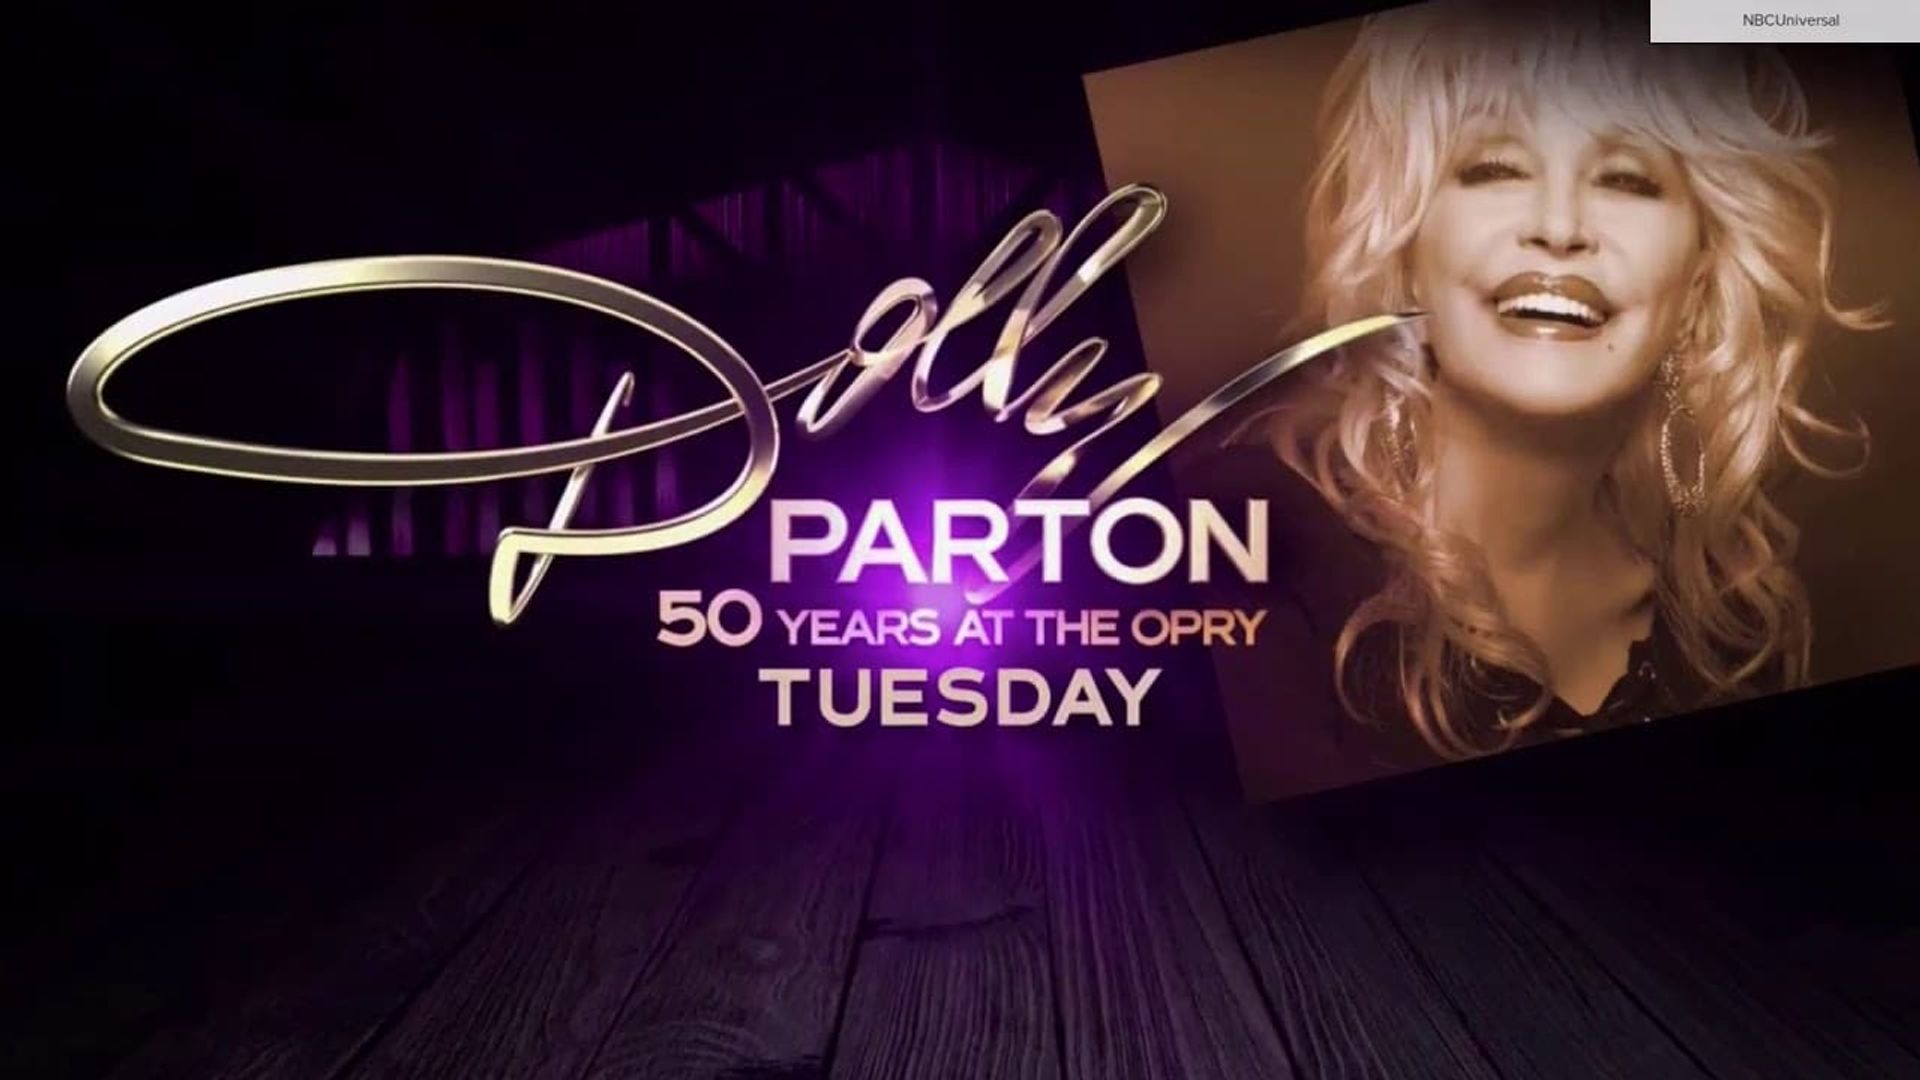 Dolly Parton: 50 Years at the Opry background